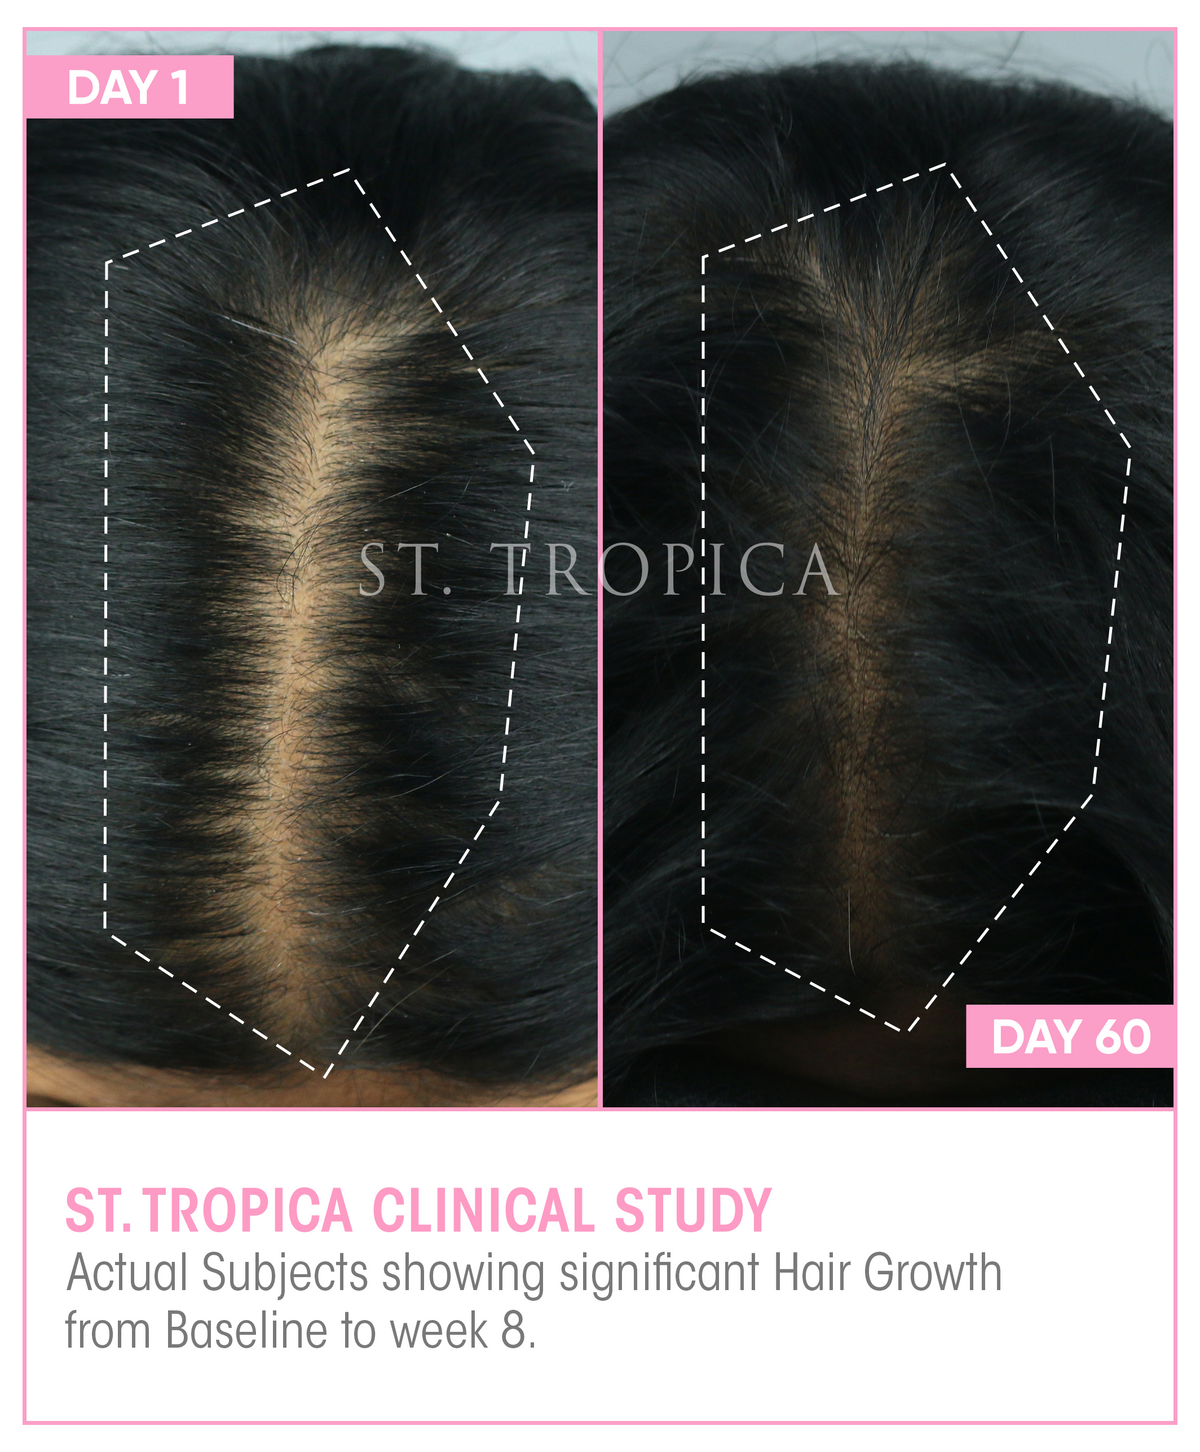 ST. TROPICA Hair Growth Vitamins - 60 Day Hair Challenge (2 Month Supply)